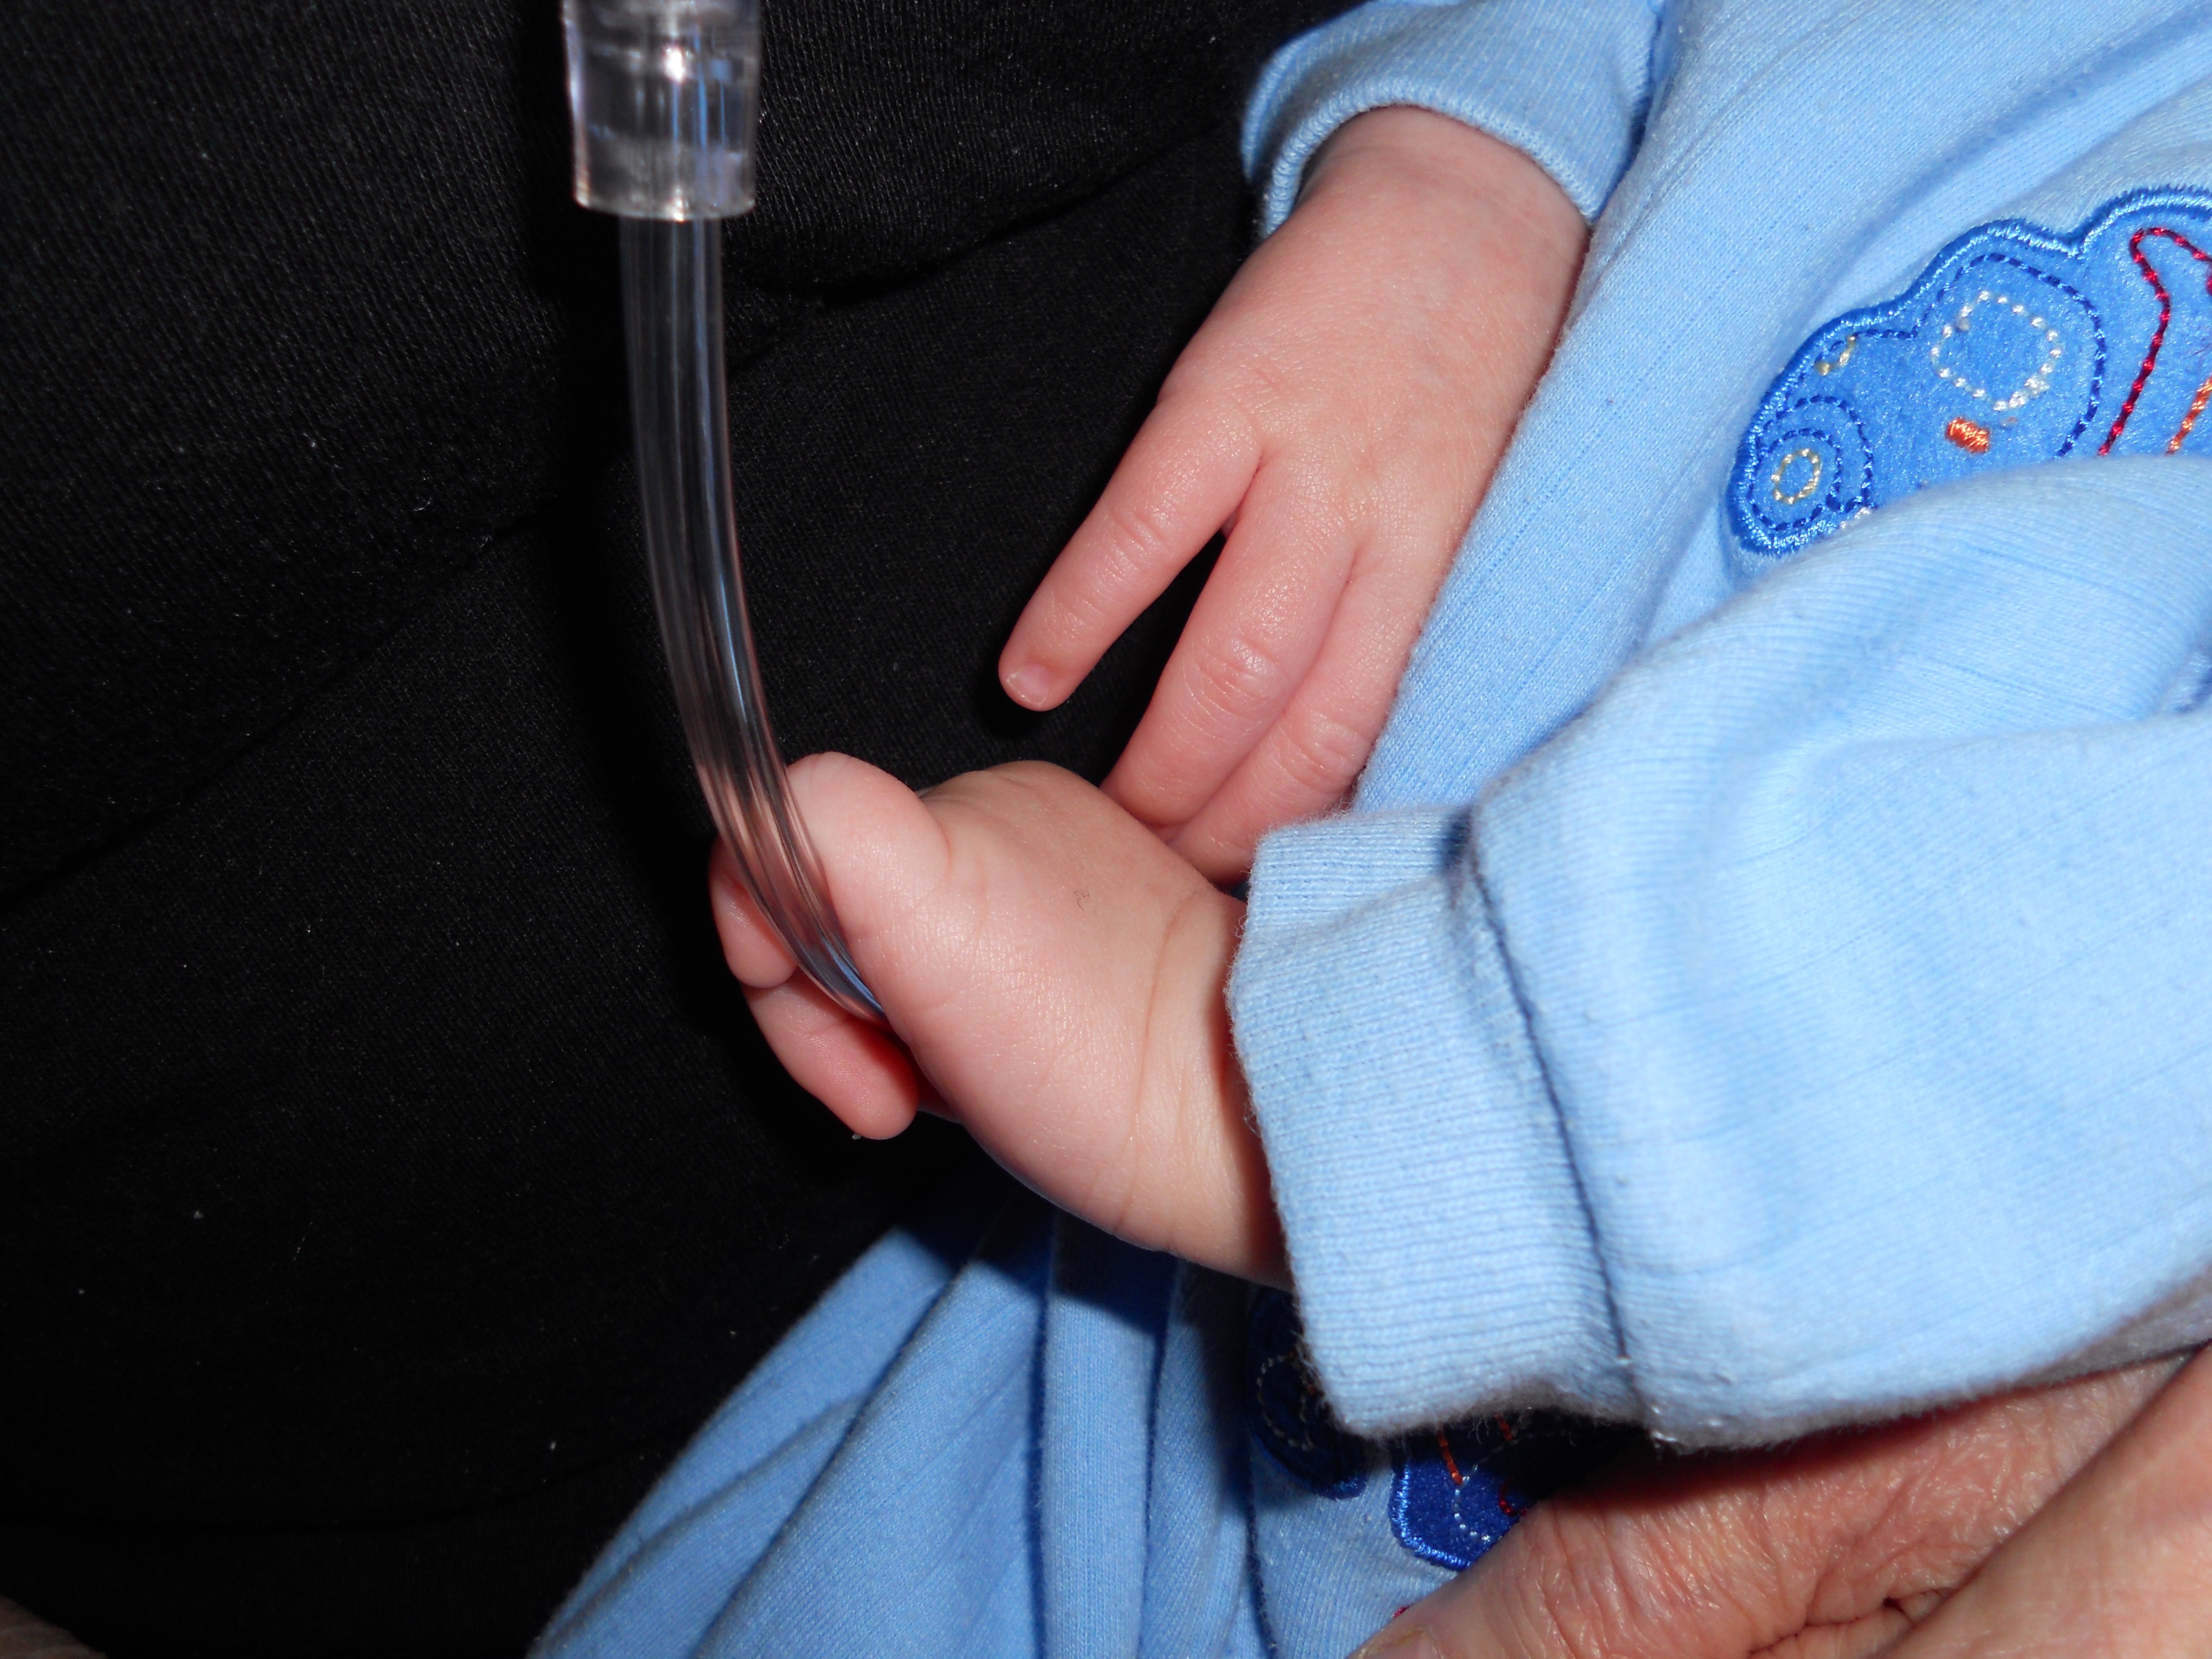 My son gripping the oxygen line like a security blanket